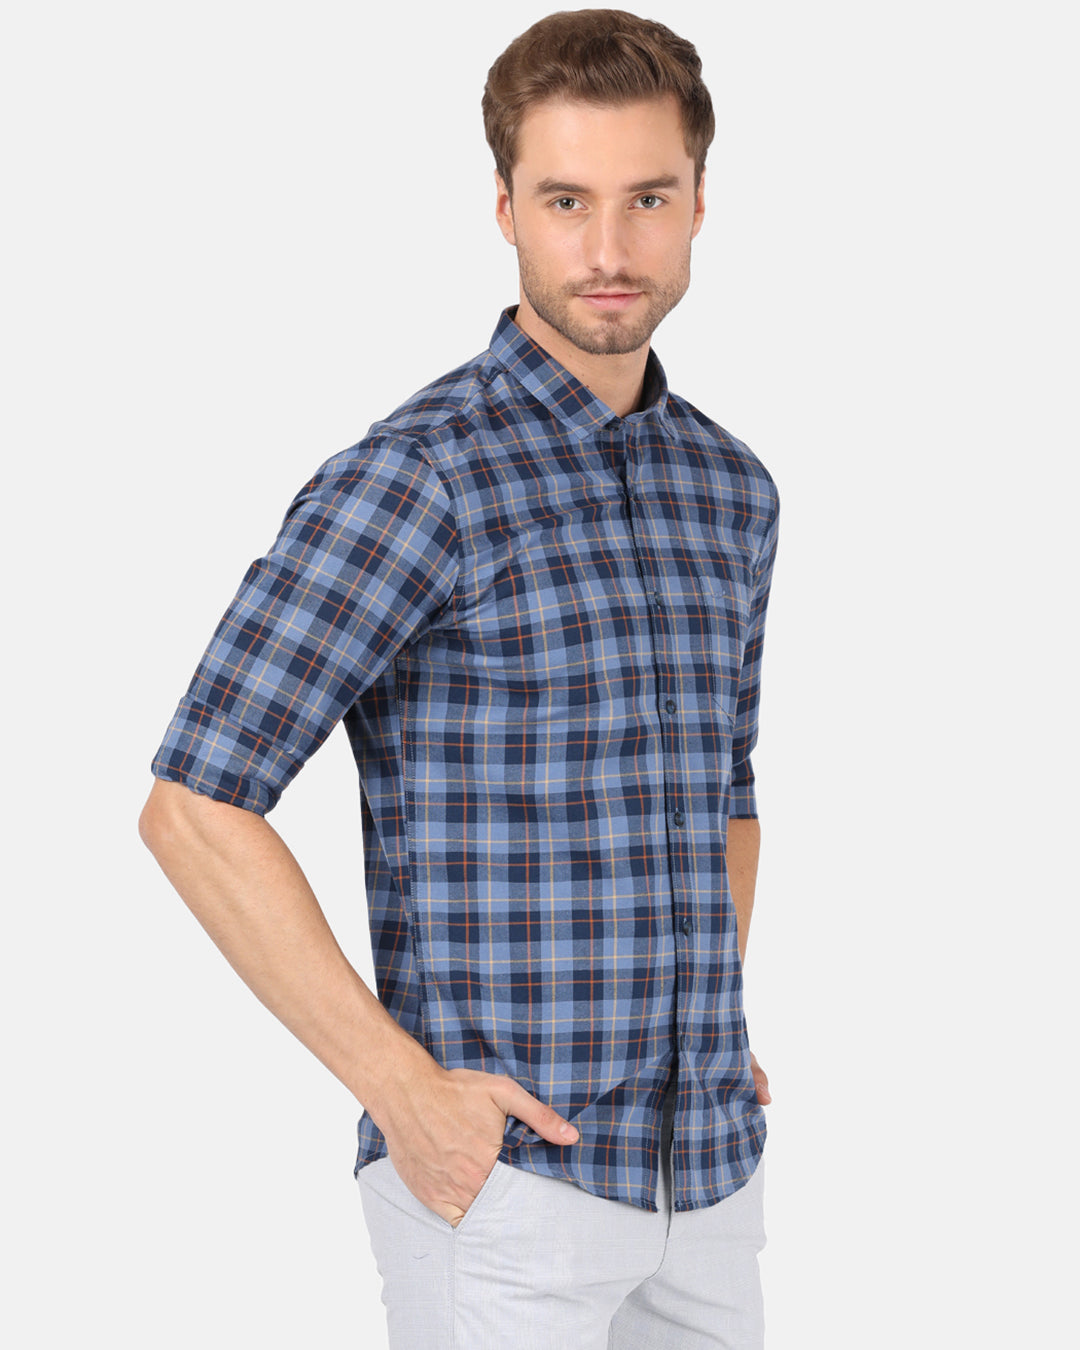 Crocodile Casual Full Sleeve Slim Fit Checks Navy with Collar Shirt for Men